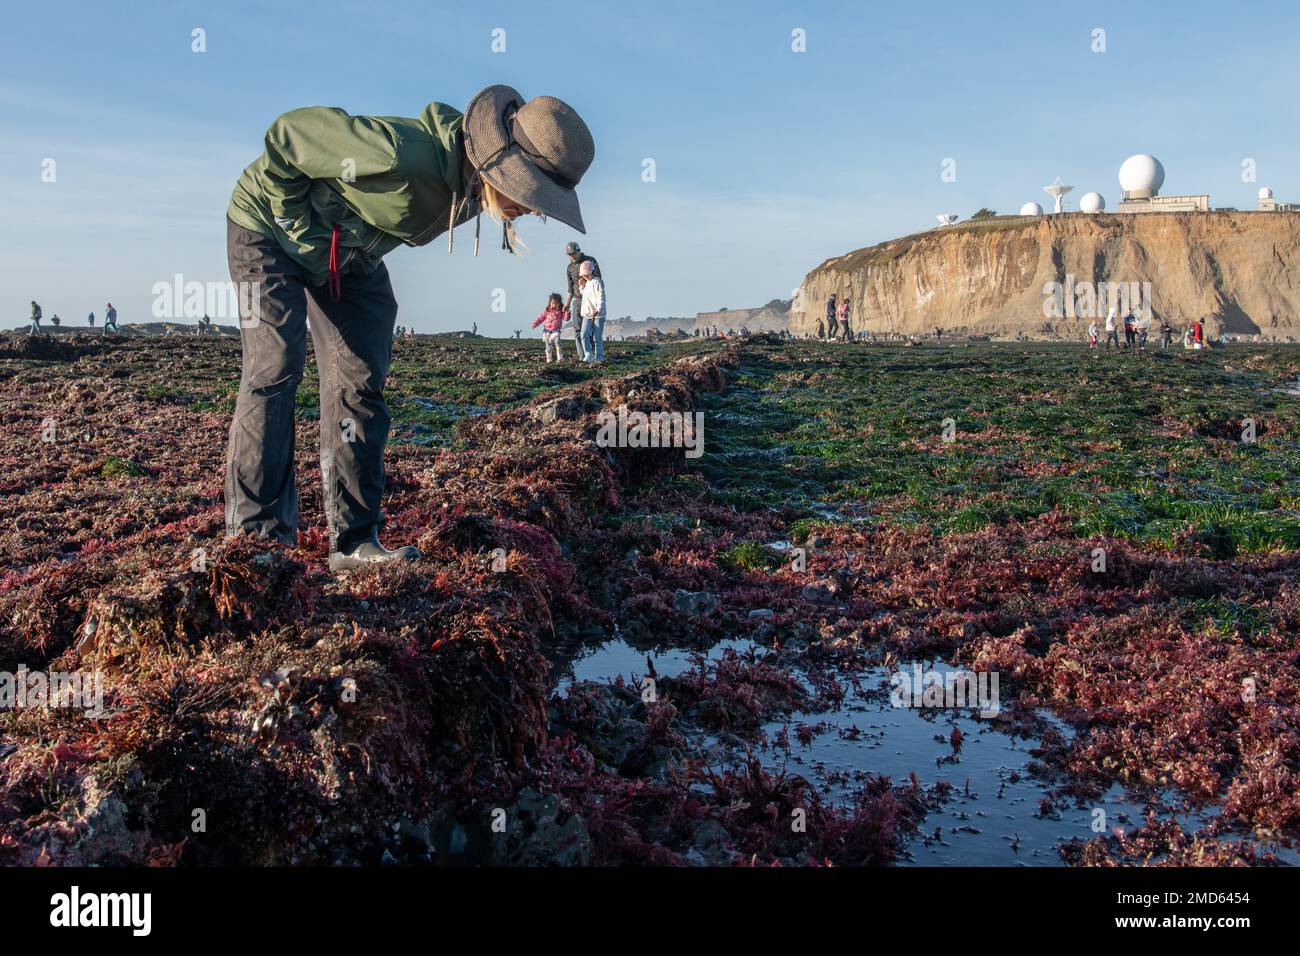 Tide pooling is a popular outdoor activity at low tide in California, here visitors search tidepools for animals at Pillar Point bluff. Stock Photo